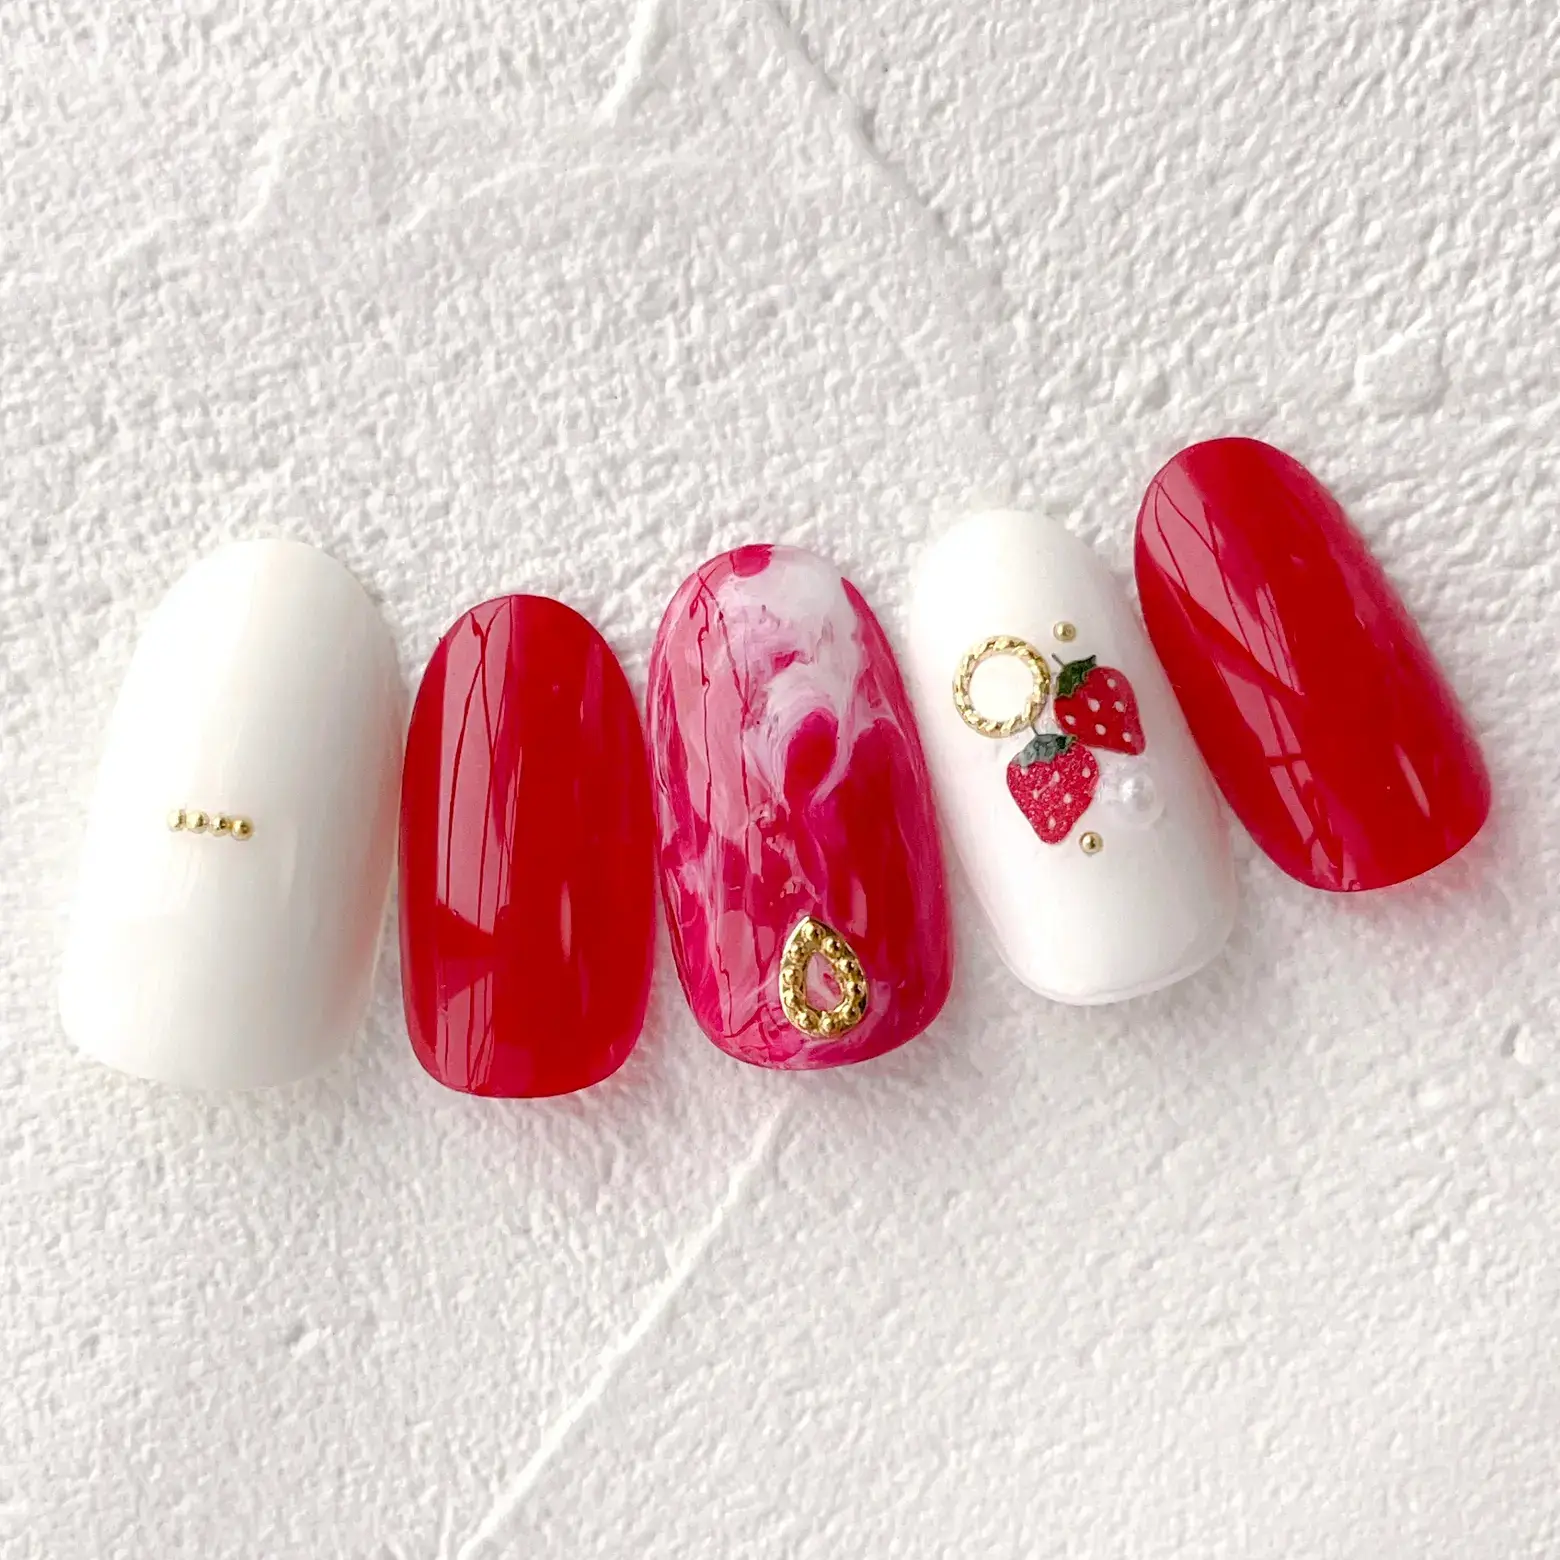 🍓🎀Strawberry coquette press on nails🍓🎀, Gallery posted by Adeilyn